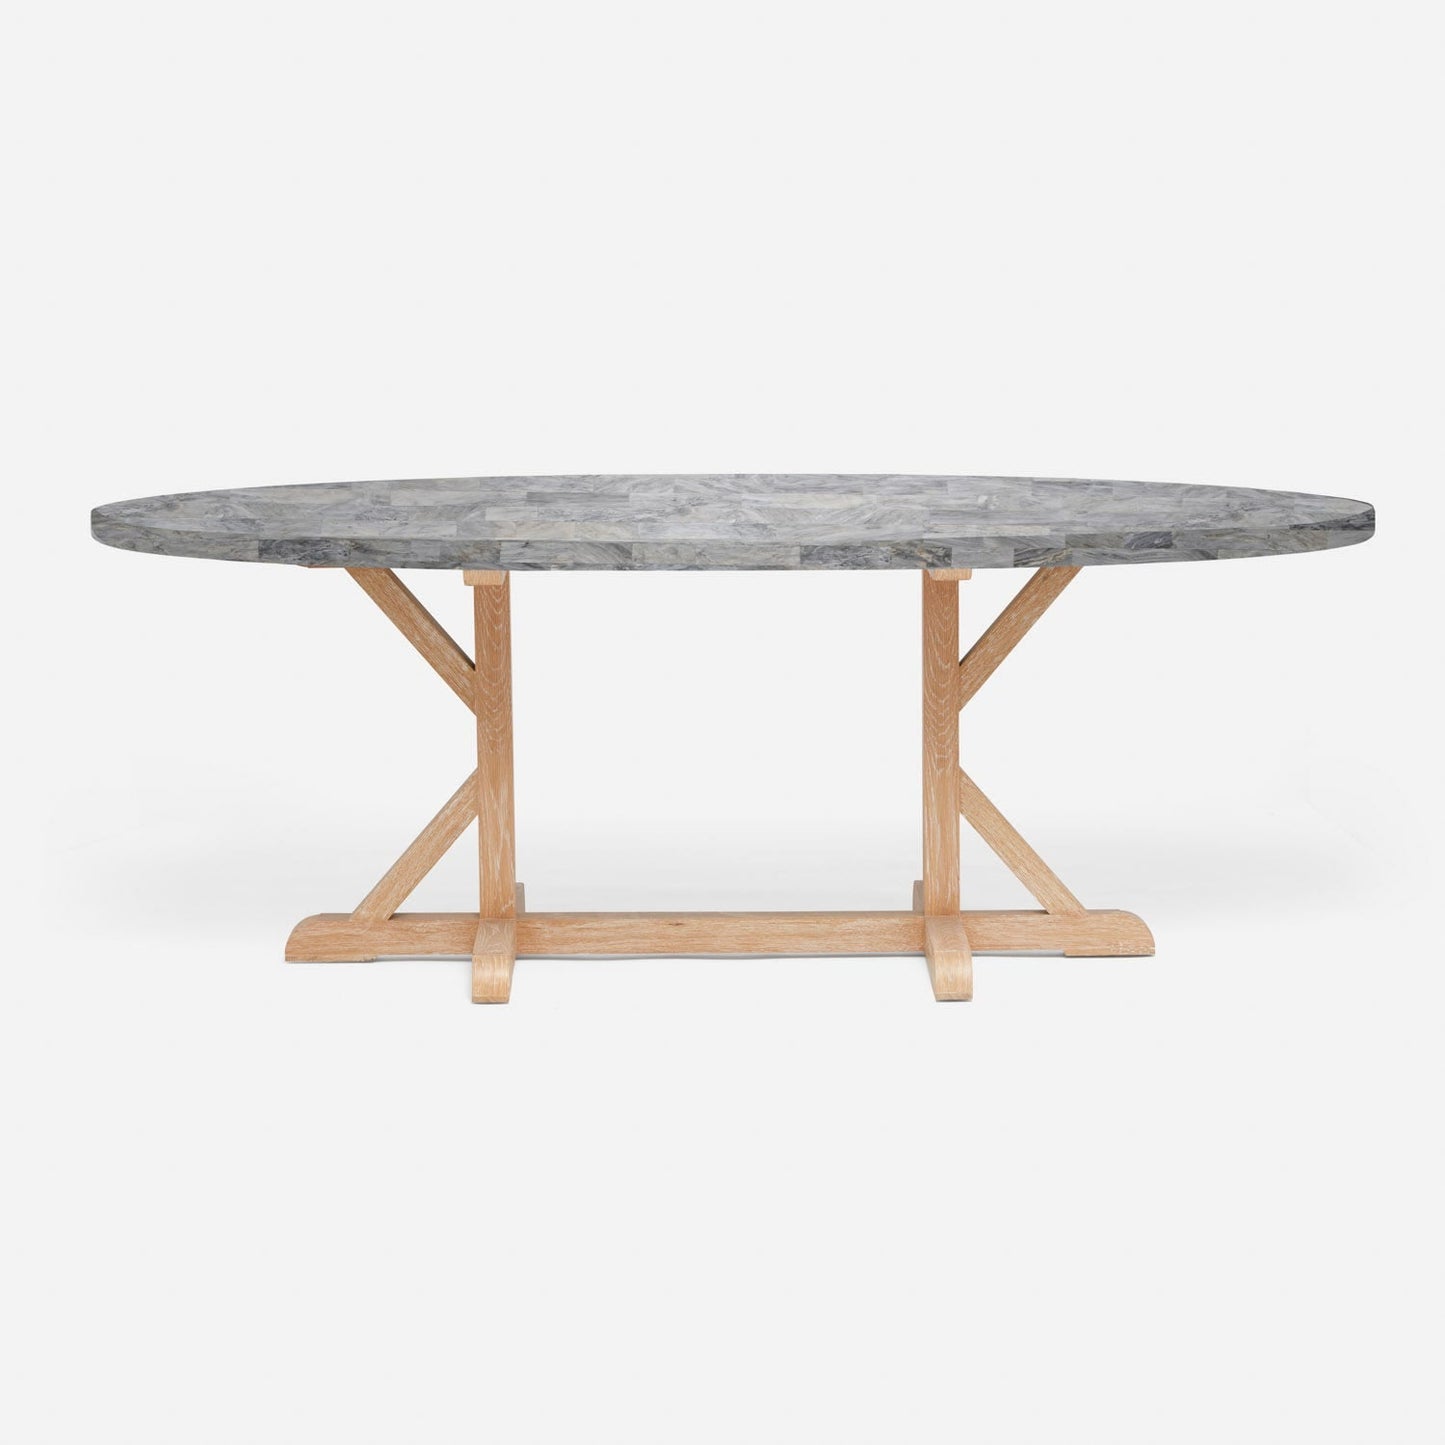 Made Goods Dane 72" x 42" x 30" White Cerused Oak Dinning Table With Oval Gray Romblon Stone Table Top